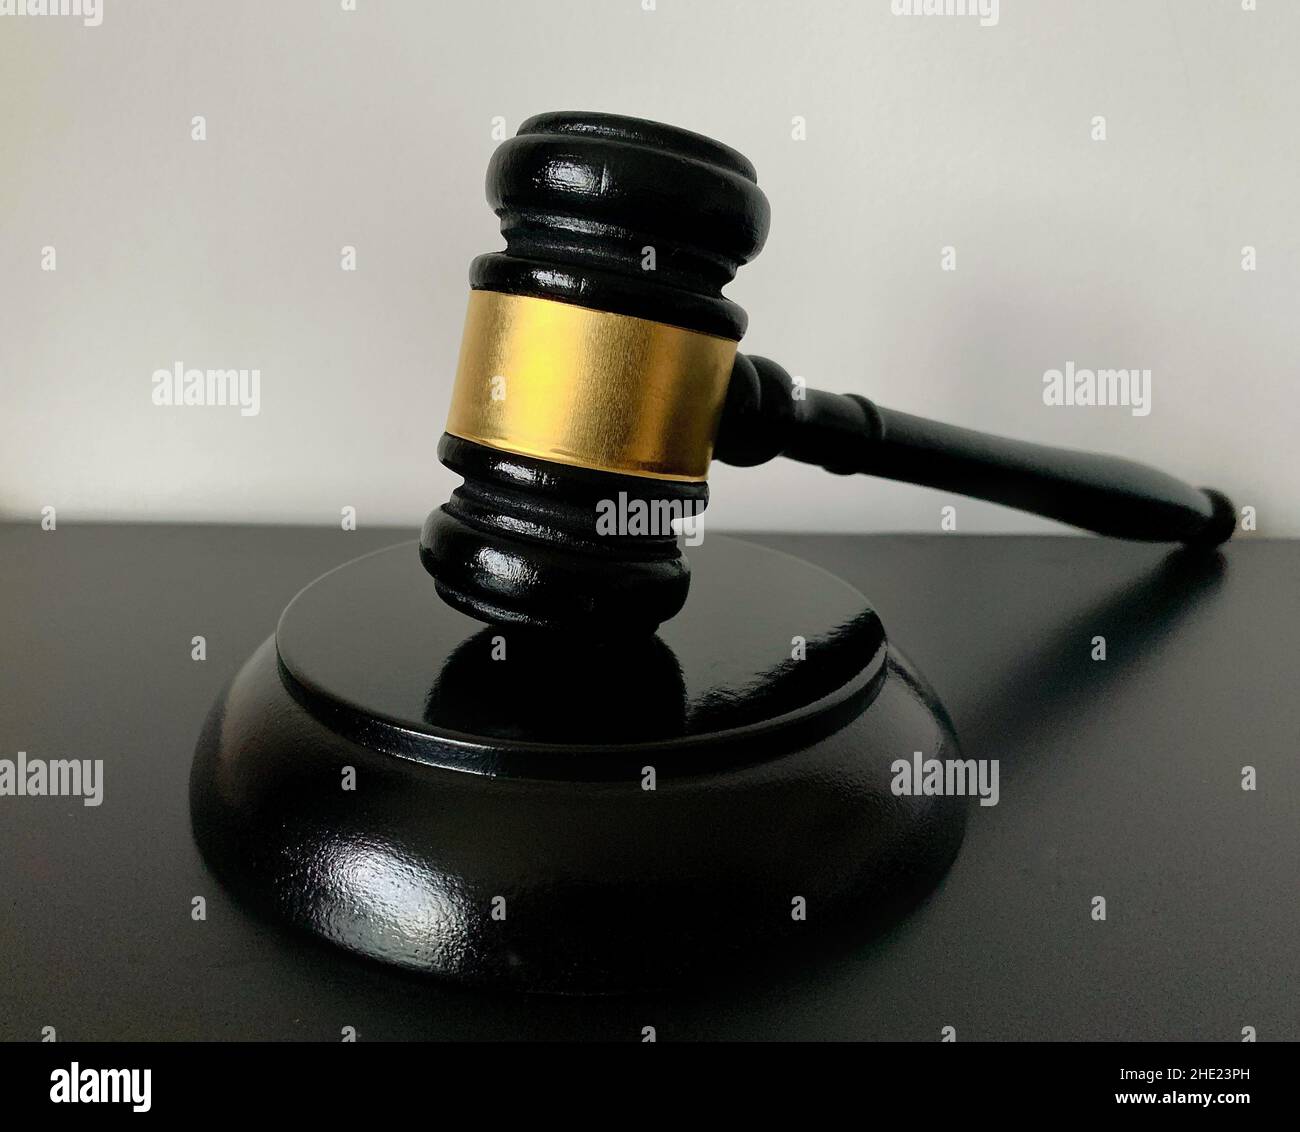 Close up of judge gavel on dark table background. Law and justice concept Stock Photo